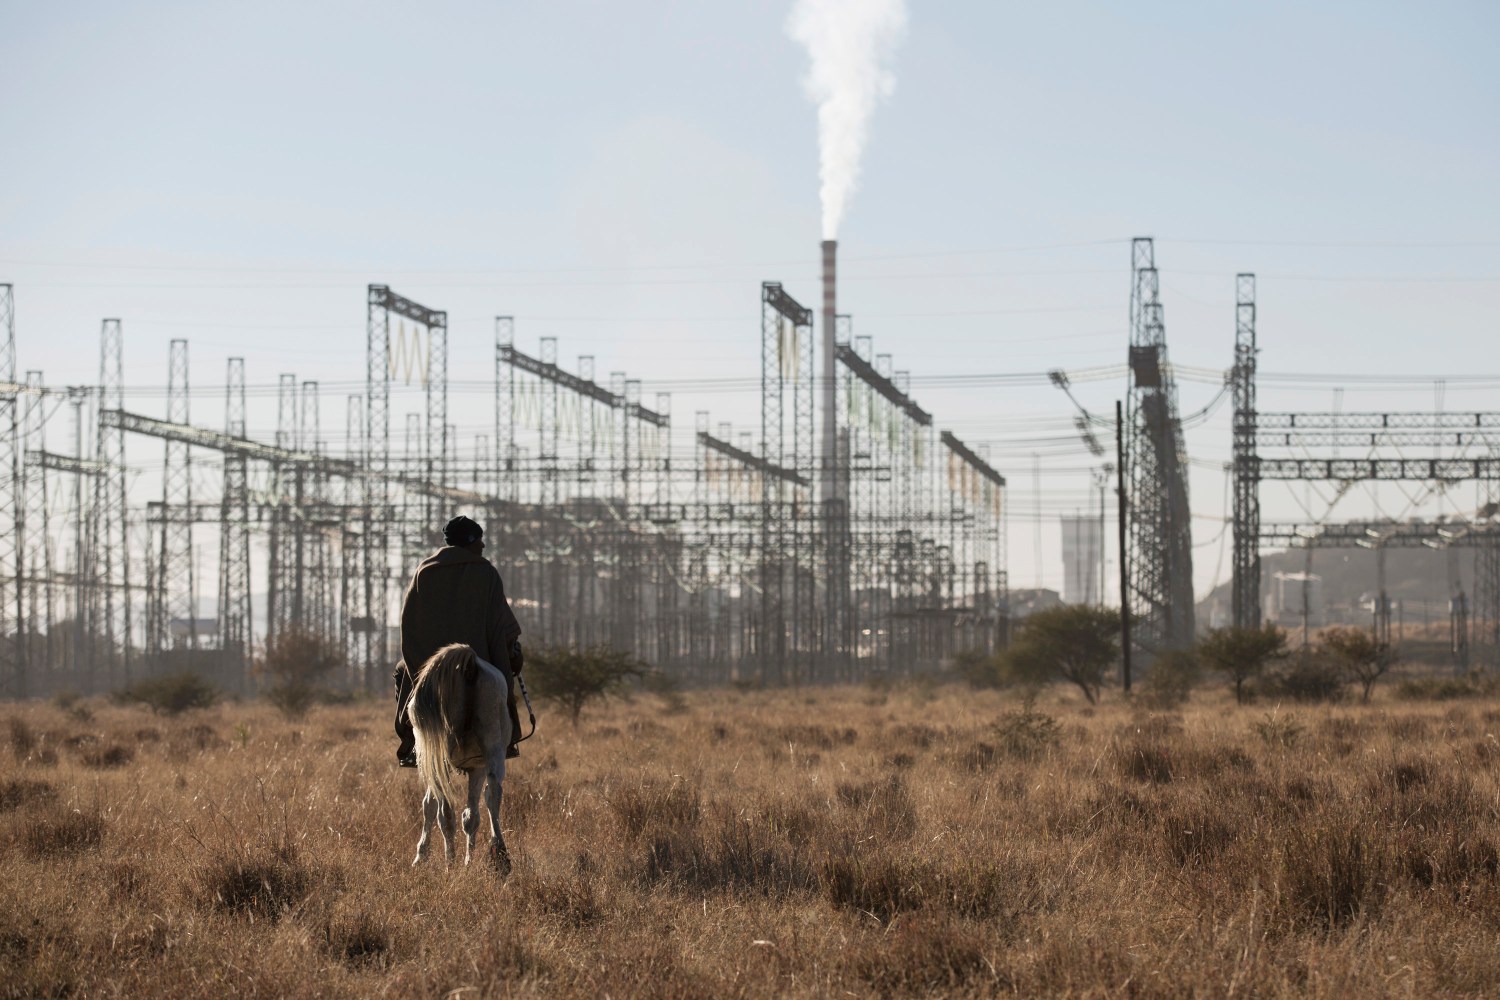 A man rides his horse near power lines supplying energy to platinum mines in Marikana June 20, 2014. Around 70 000 platinum miners have been on strike for 5 months as negotiations around wages and benefits continue. REUTERS/Rogan Ward (SOUTH AFRICA - Tags: ENERGY BUSINESS EMPLOYMENT POLITICS)